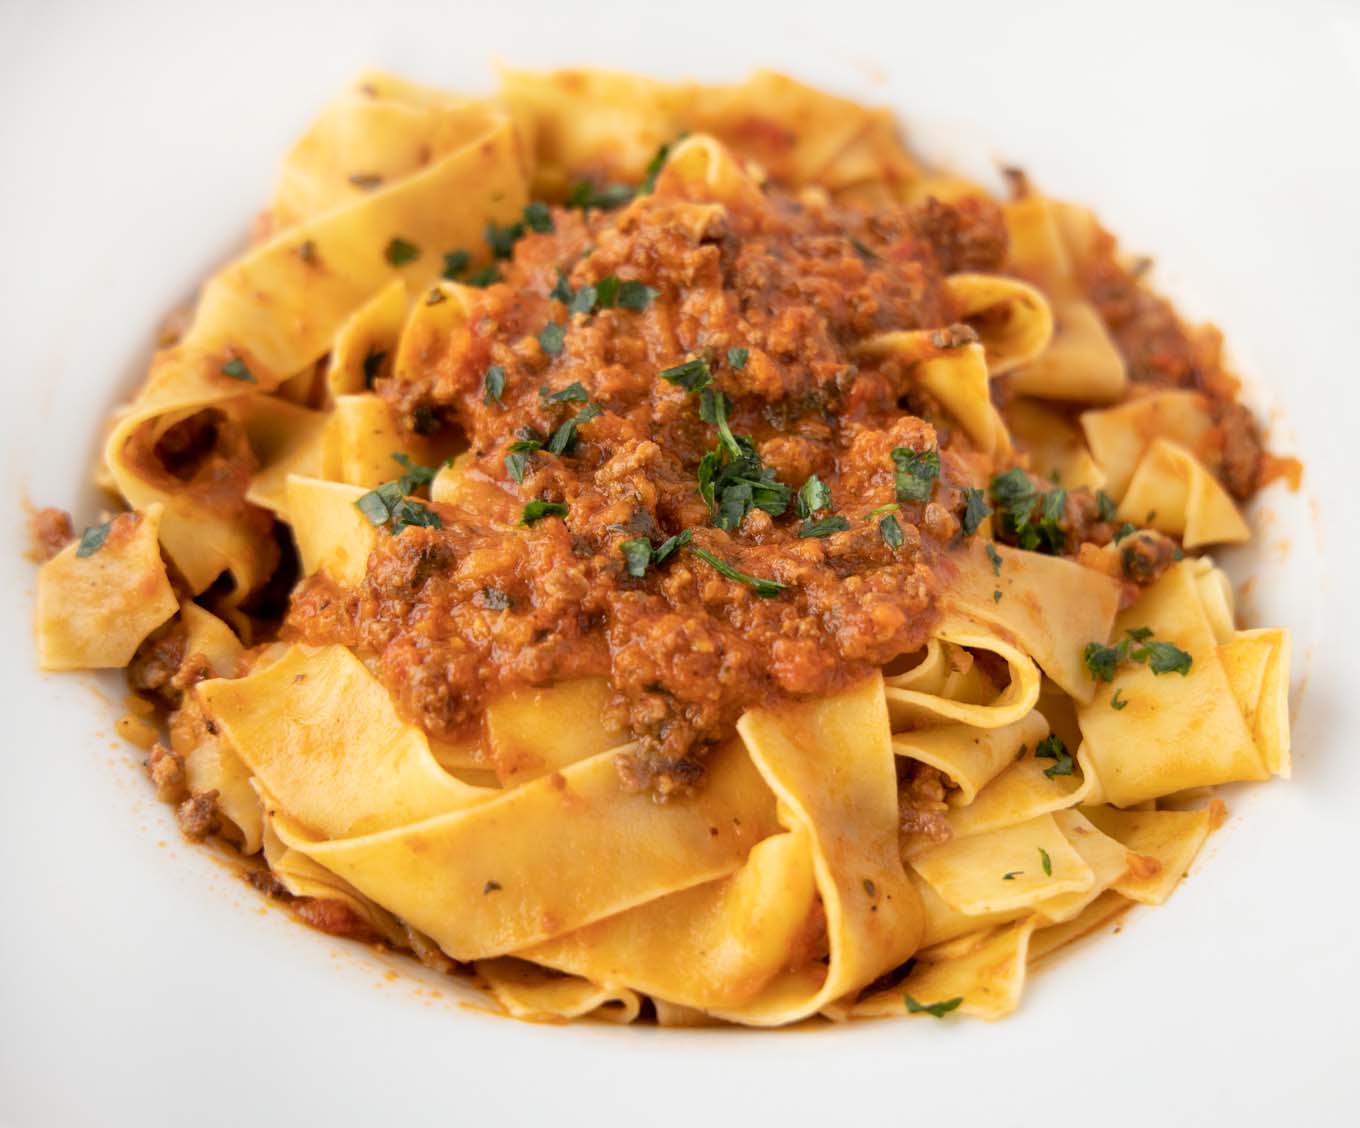 white bowl of pappardelle noodles with bolognese sauce